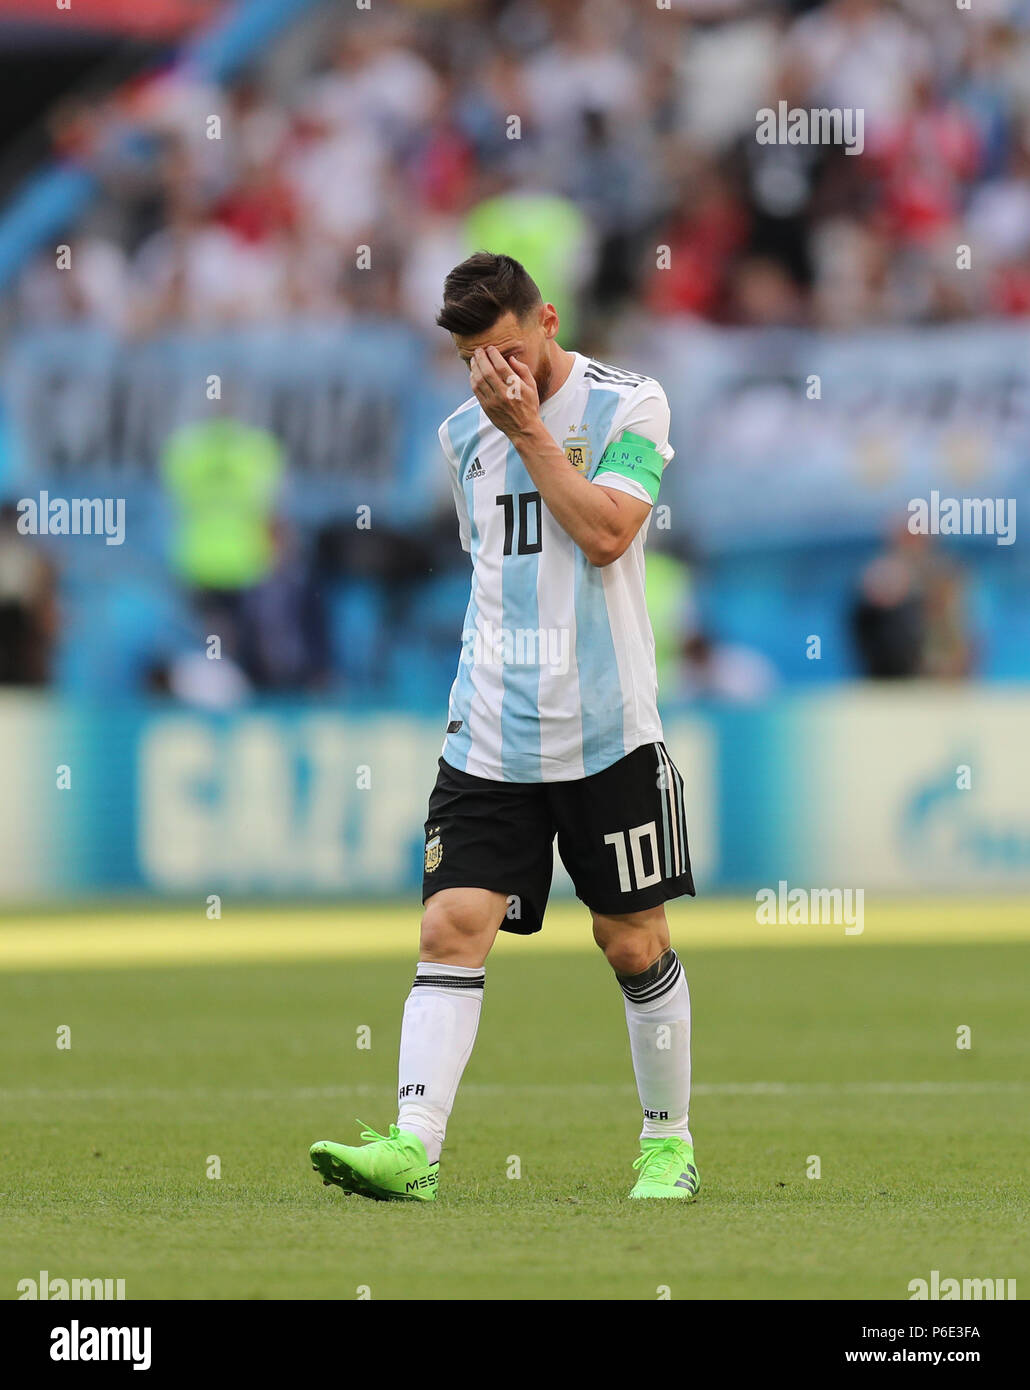 (180630) -- KAZAN, June 30, 2018 (Xinhua) -- Lionel Messi of Argentina reacts during the 2018 FIFA World Cup round of 16 match between France and Argentina in Kazan, Russia, on June 30, 2018. (Xinhua/Lu Jinbo) Stock Photo